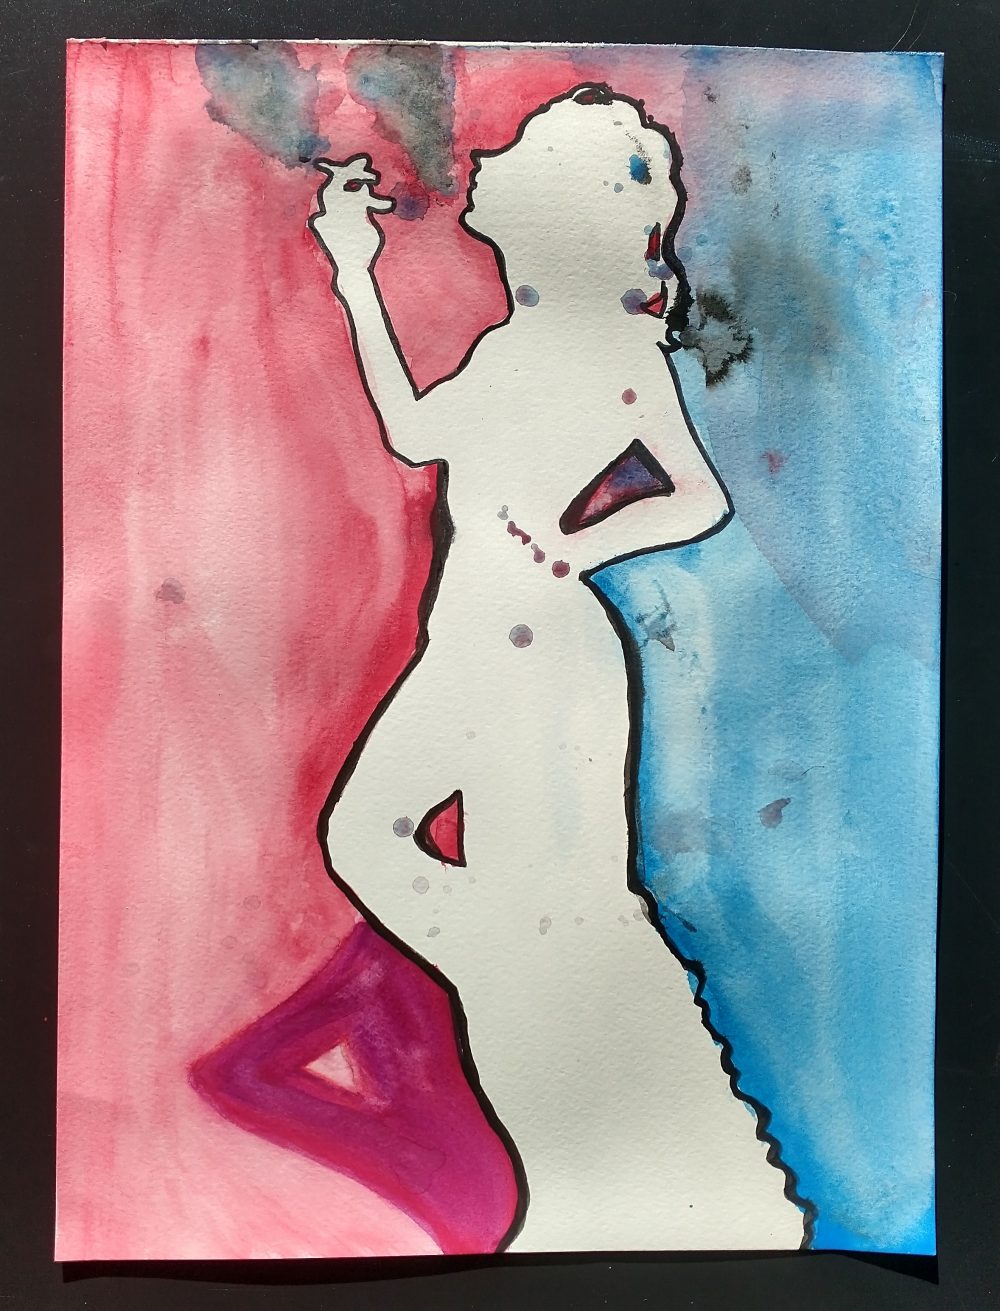 A white silhouette of a woman is seen smoking a cigarette. The background is a combination of blue and red which combines in splattering and blooming across the piece.